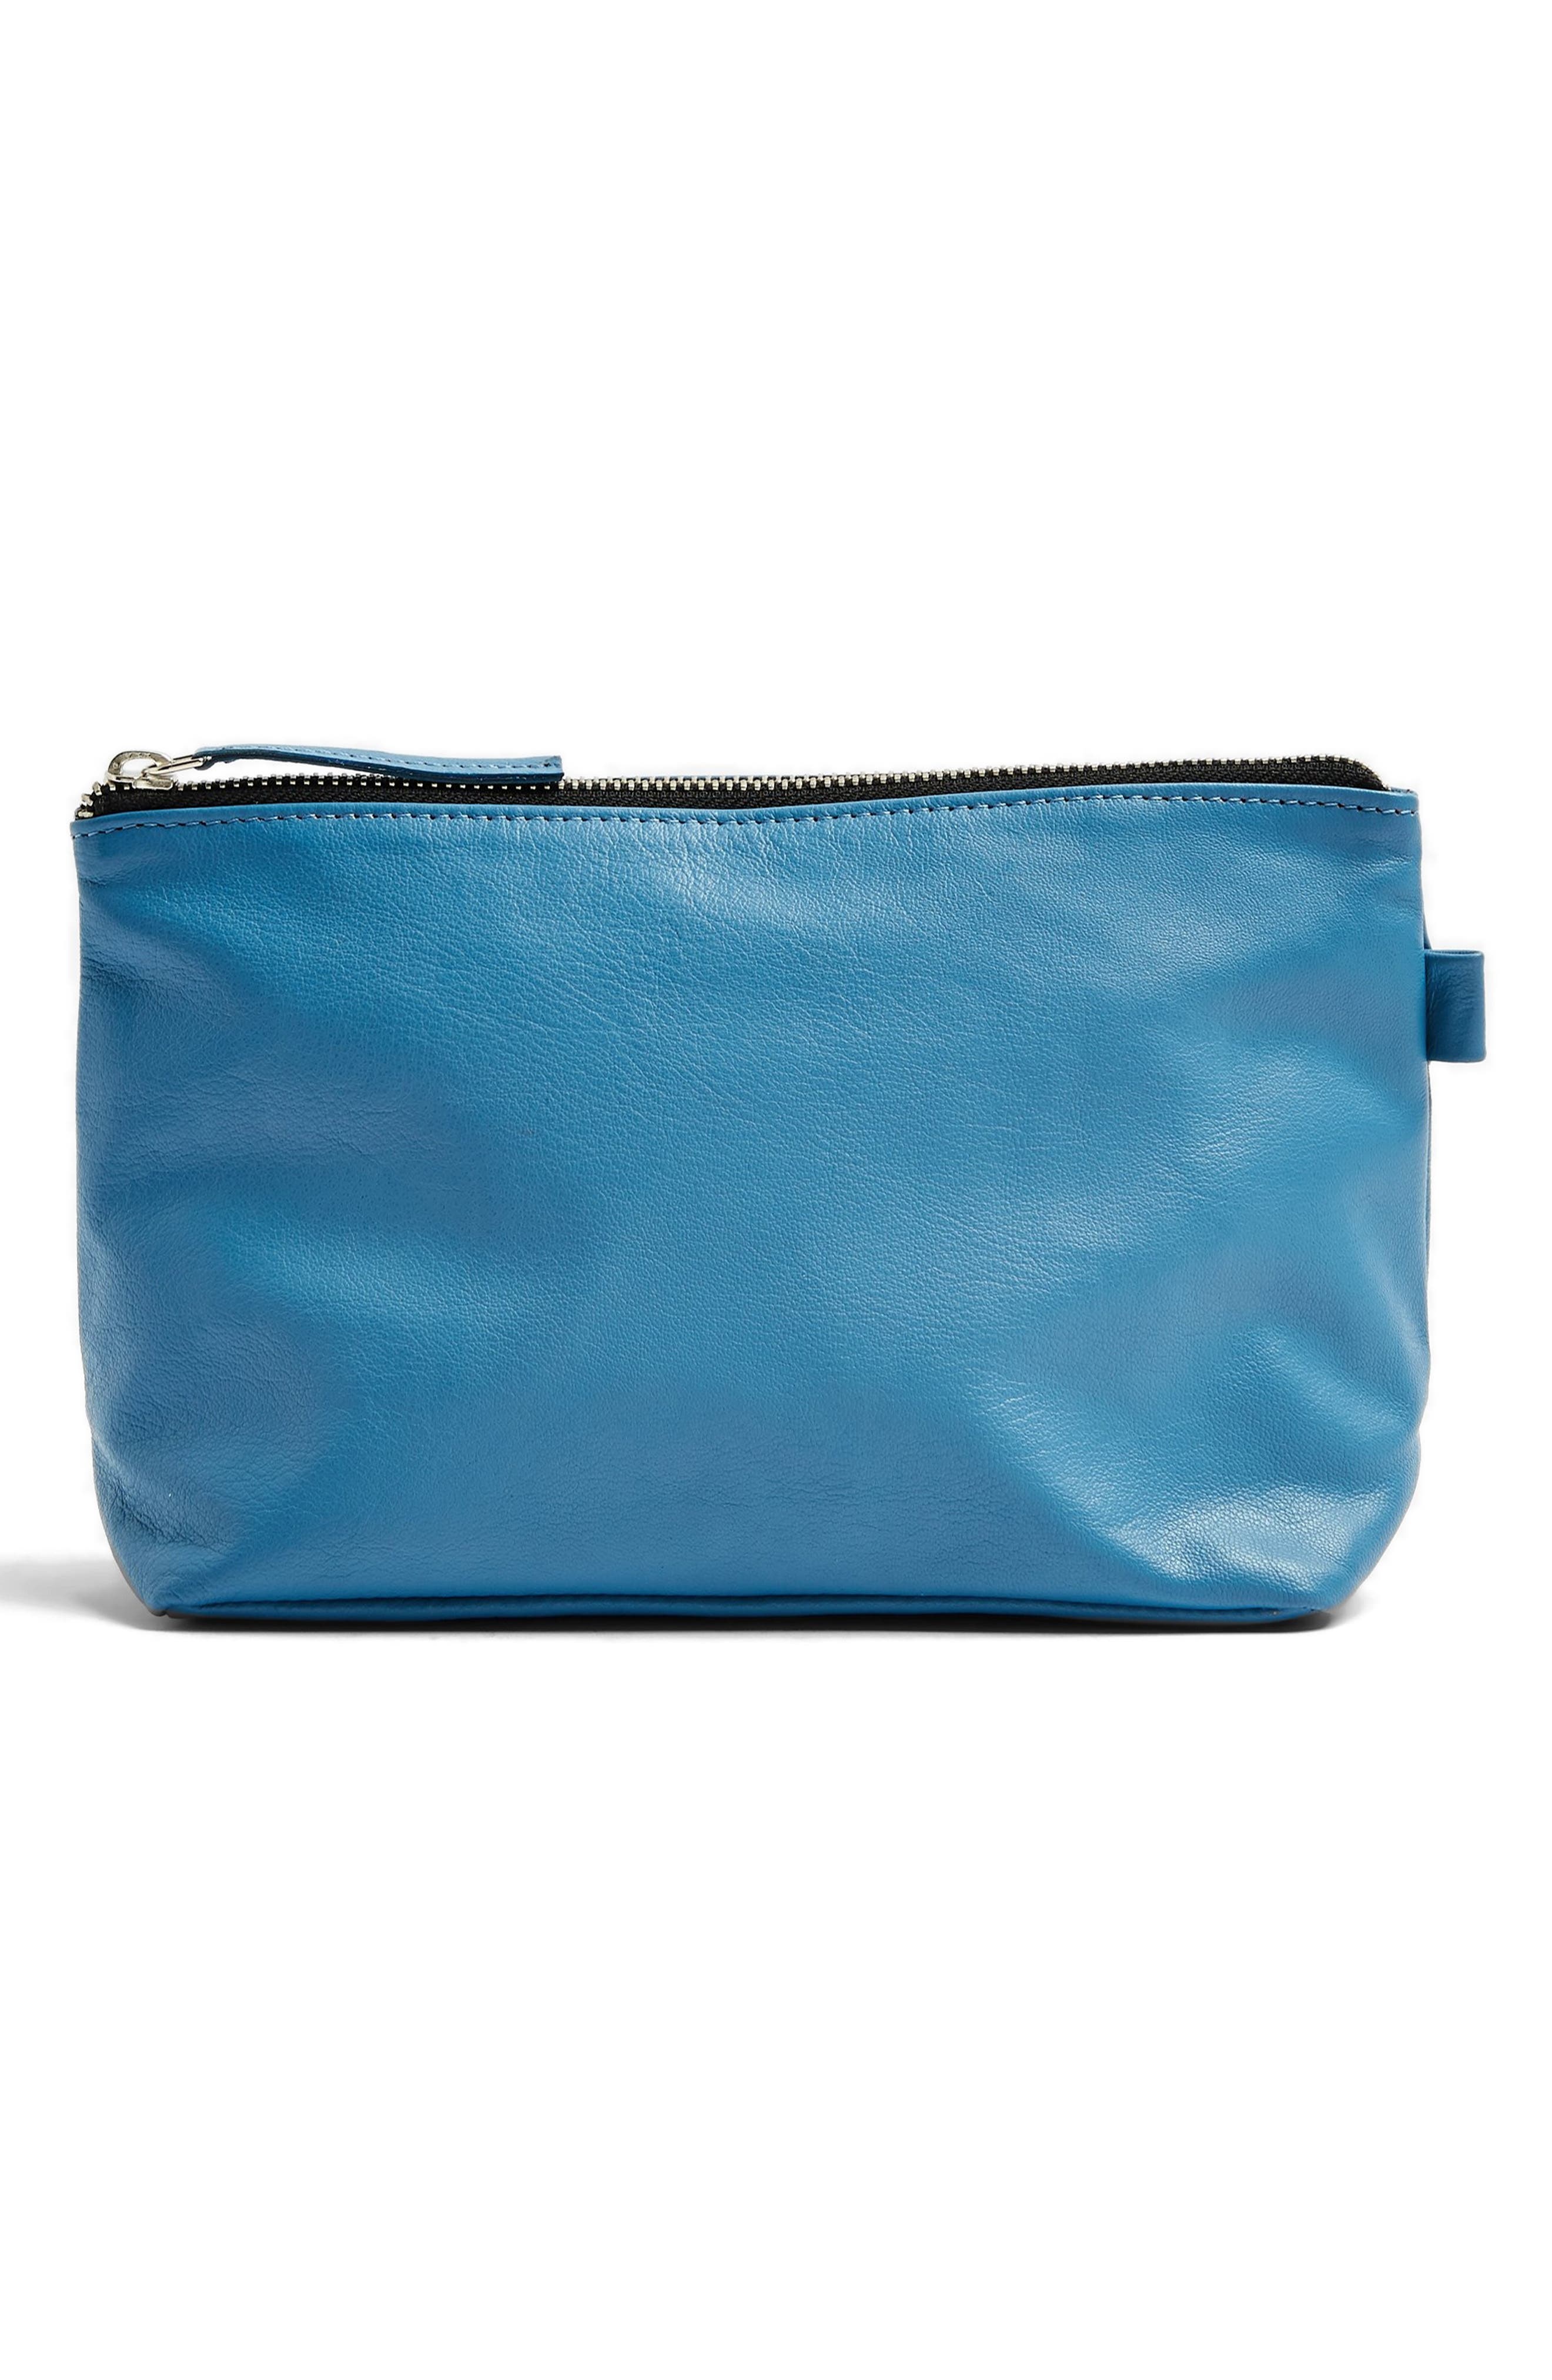 Pouch Blue leather pouch Leather make-up pouch Bag pouch Leather Clutch Genuine Leather pouch leather bag Leather Pouch 7.5 x 6 x 1